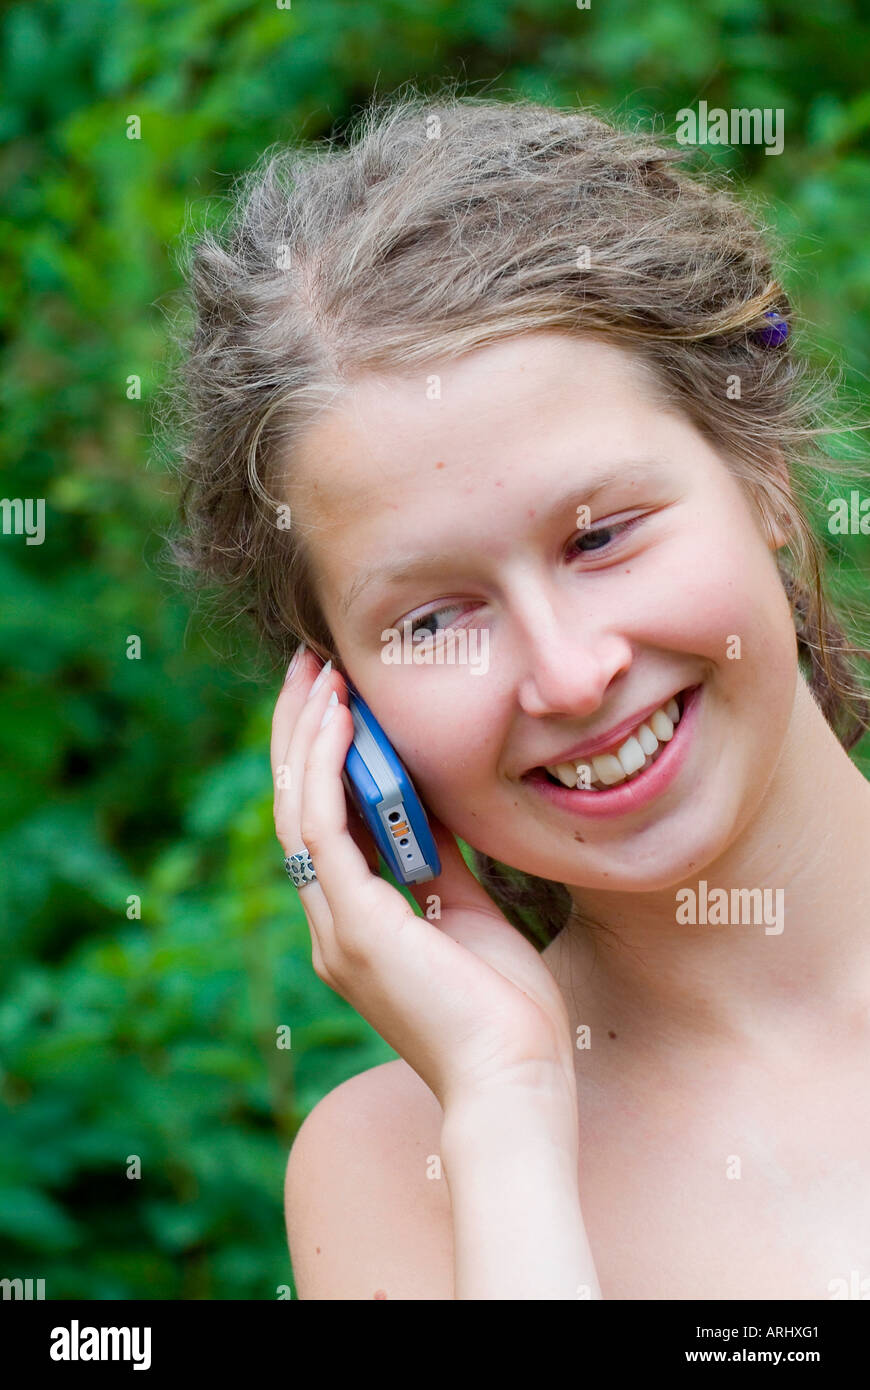 young woman girl making a phone call calling with a mobile phone smiling Stock Photo